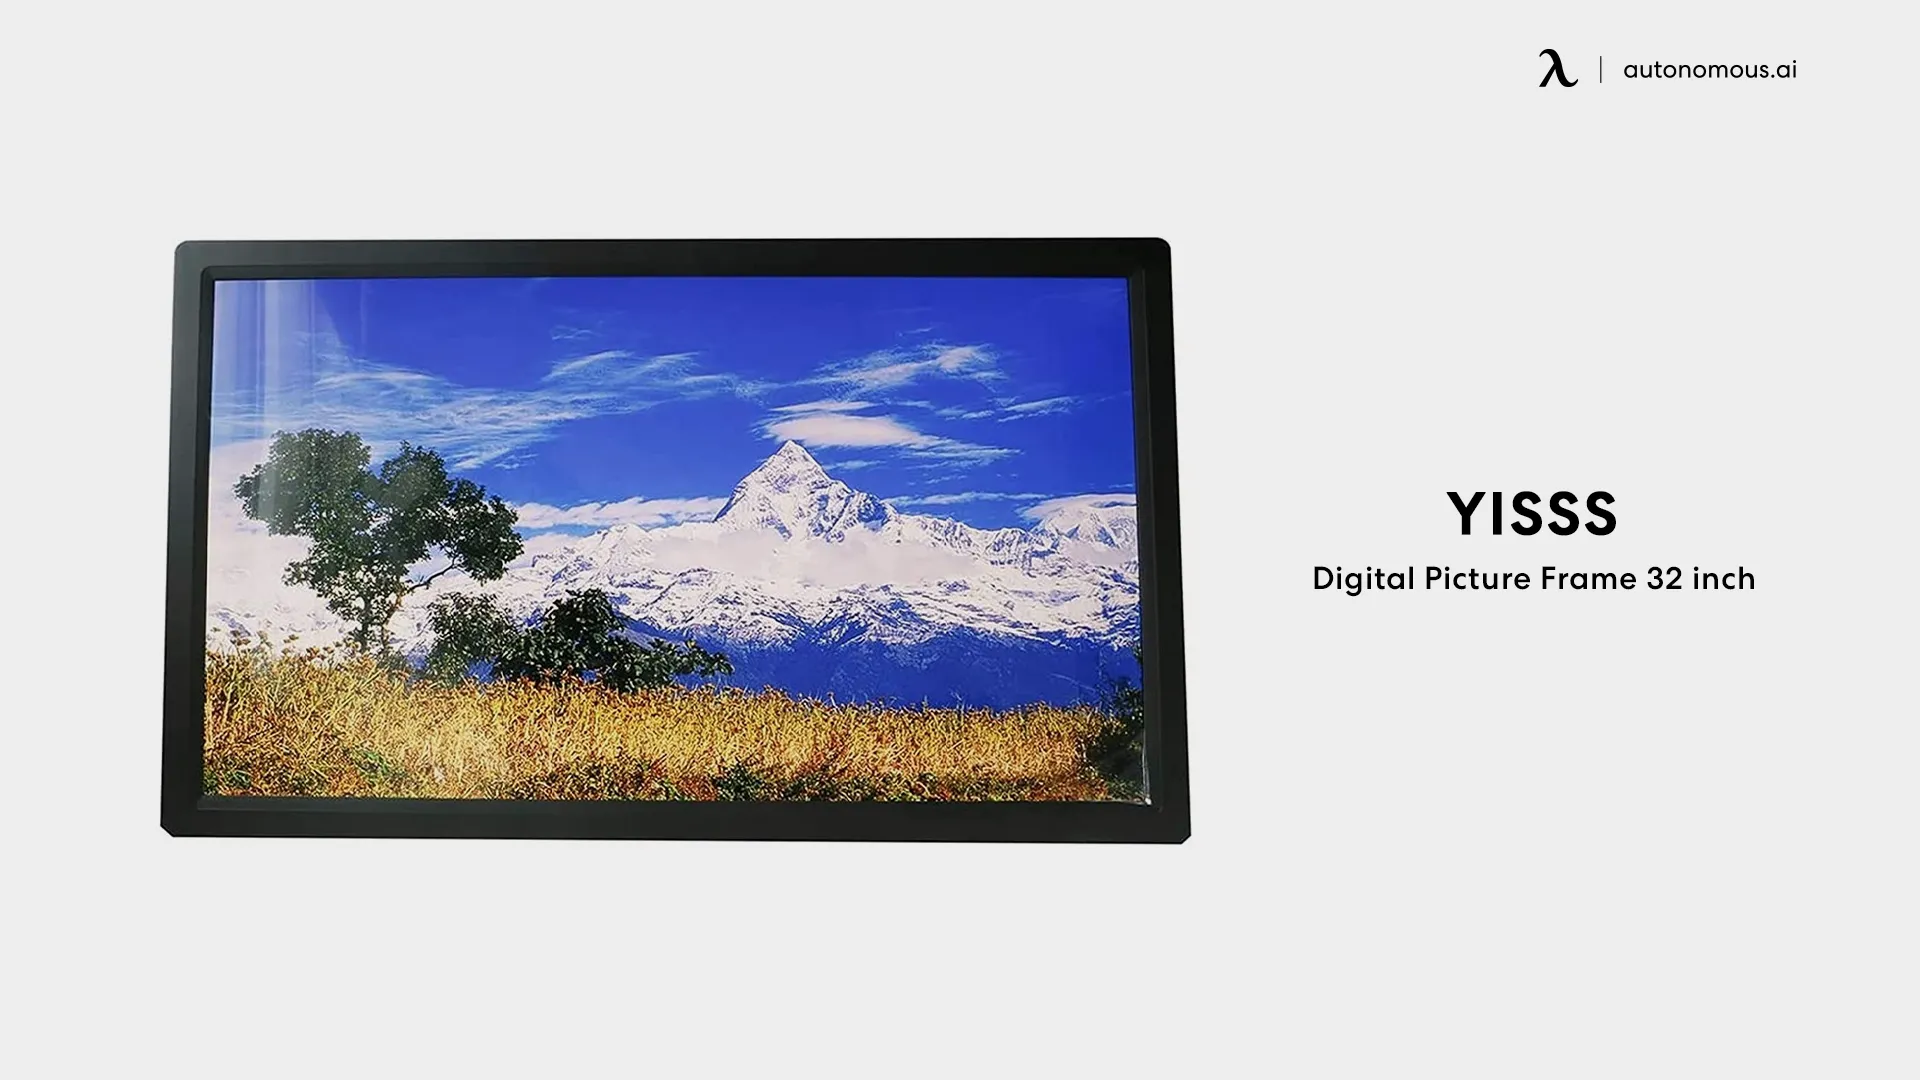 Yisss 32-inch digital picture frame